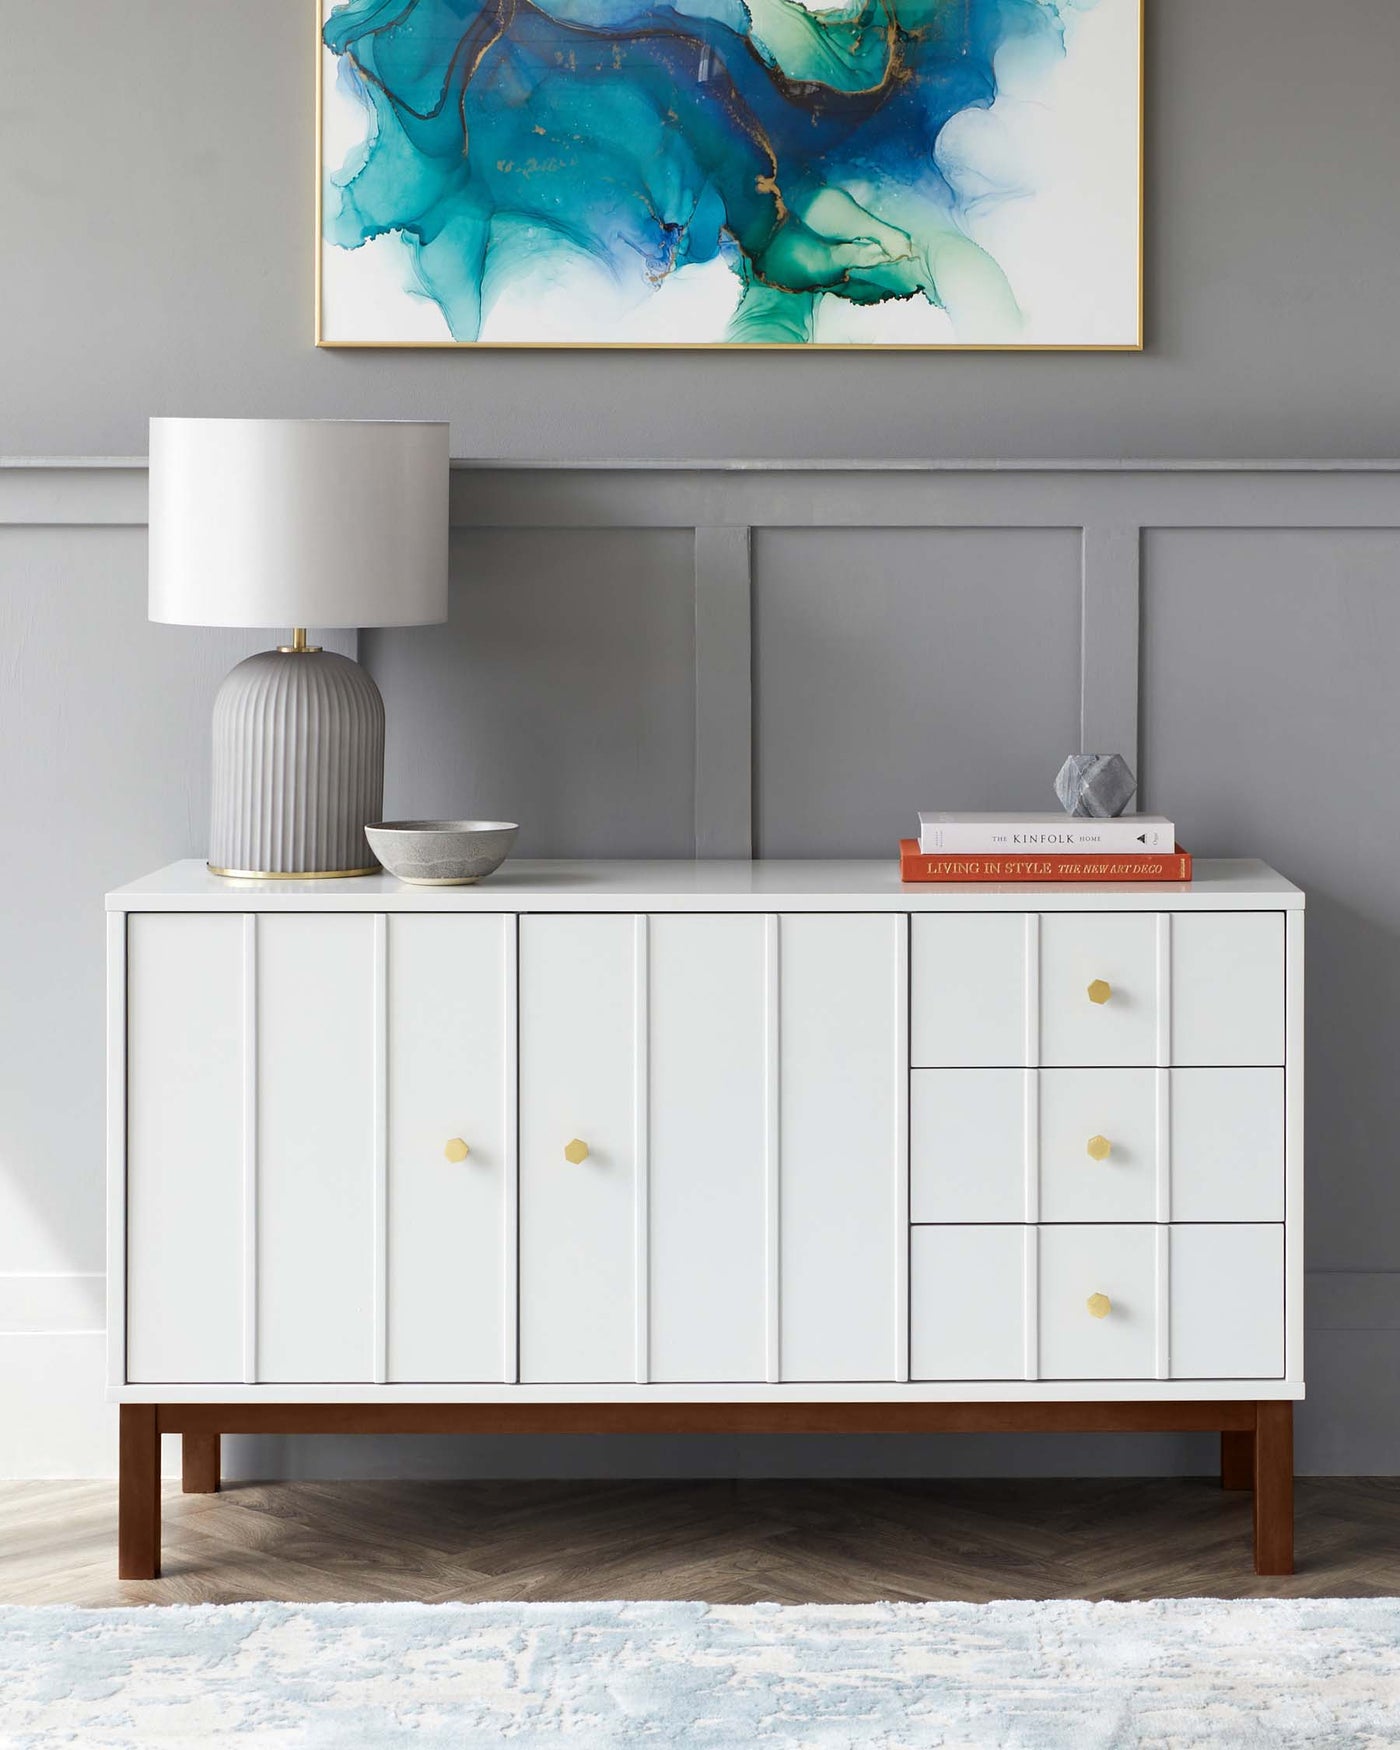 Modern white sideboard with clean lines, featuring gold handles, a mix of cabinet doors and drawers, and a contrasting dark wooden base. A contemporary lamp and decorative items are placed on top.